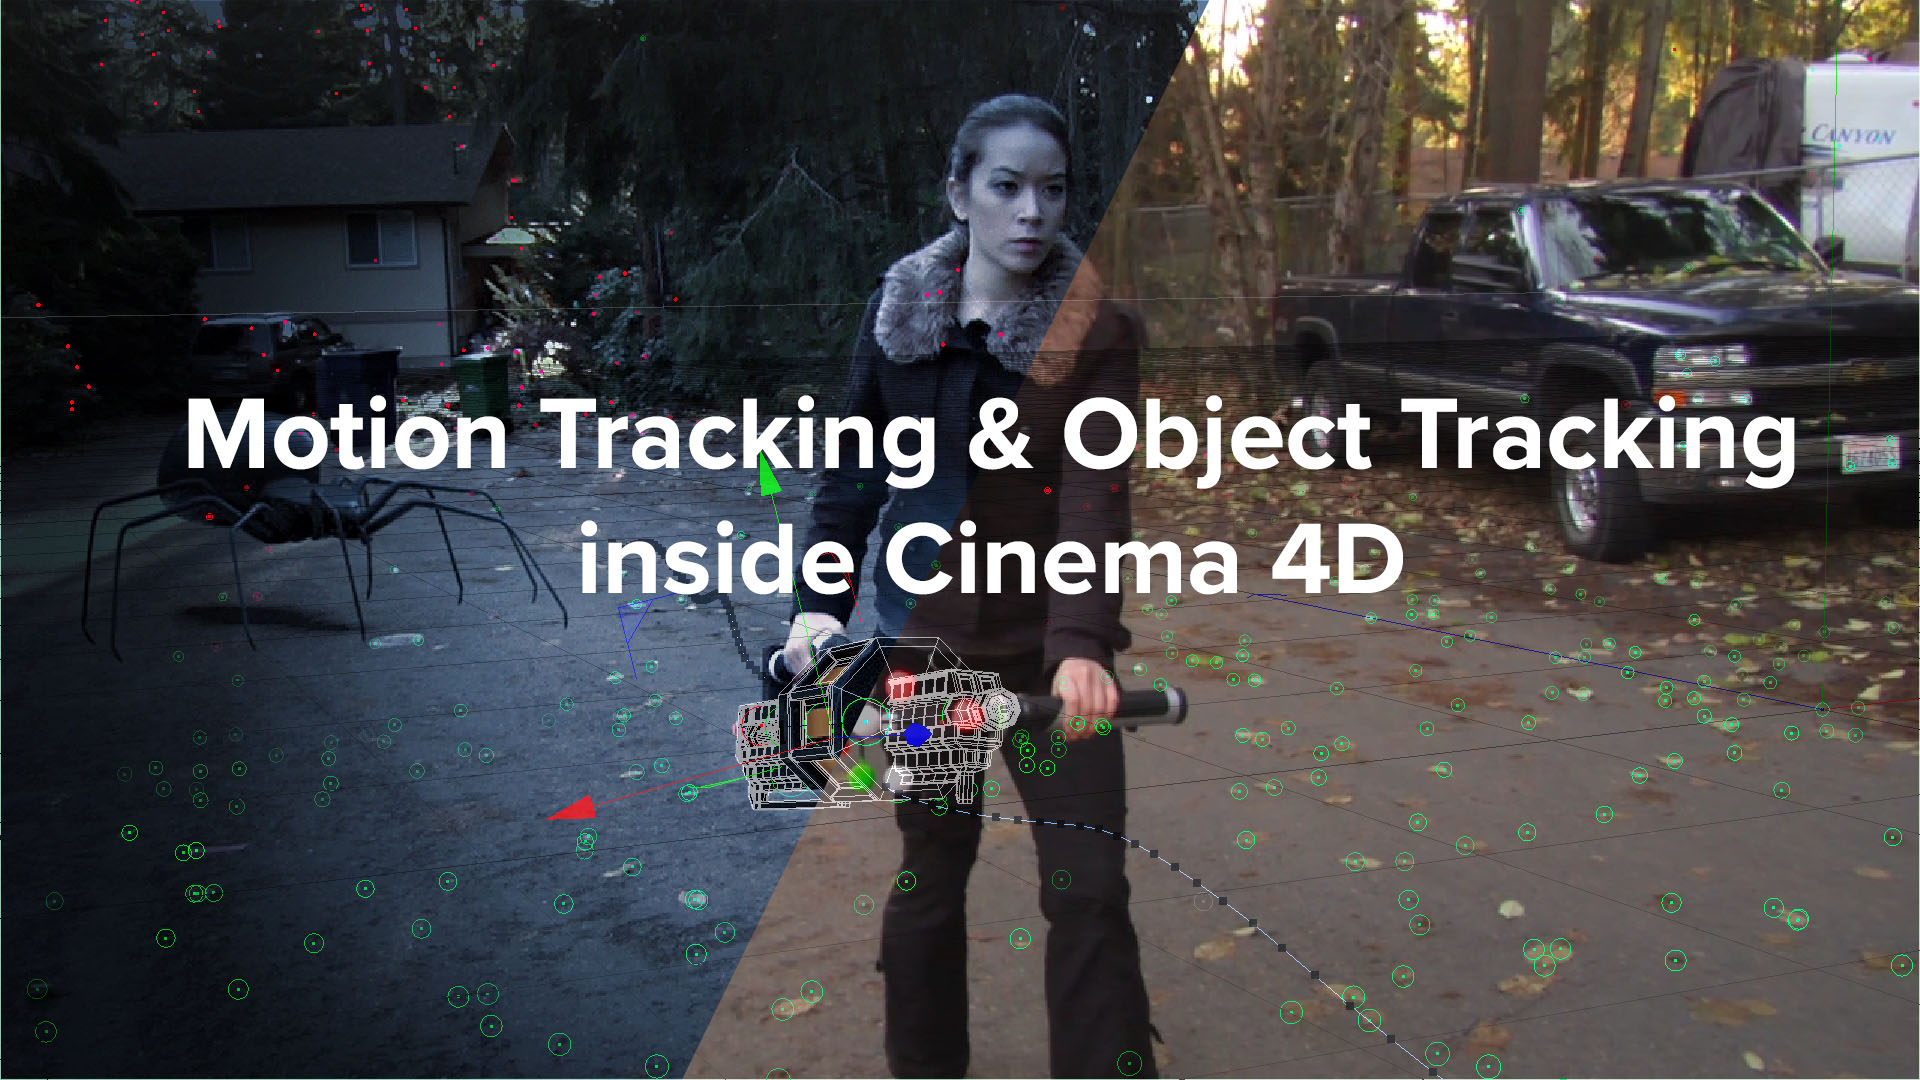 Motion Tracking & Object Tracking inside Cinema 4D